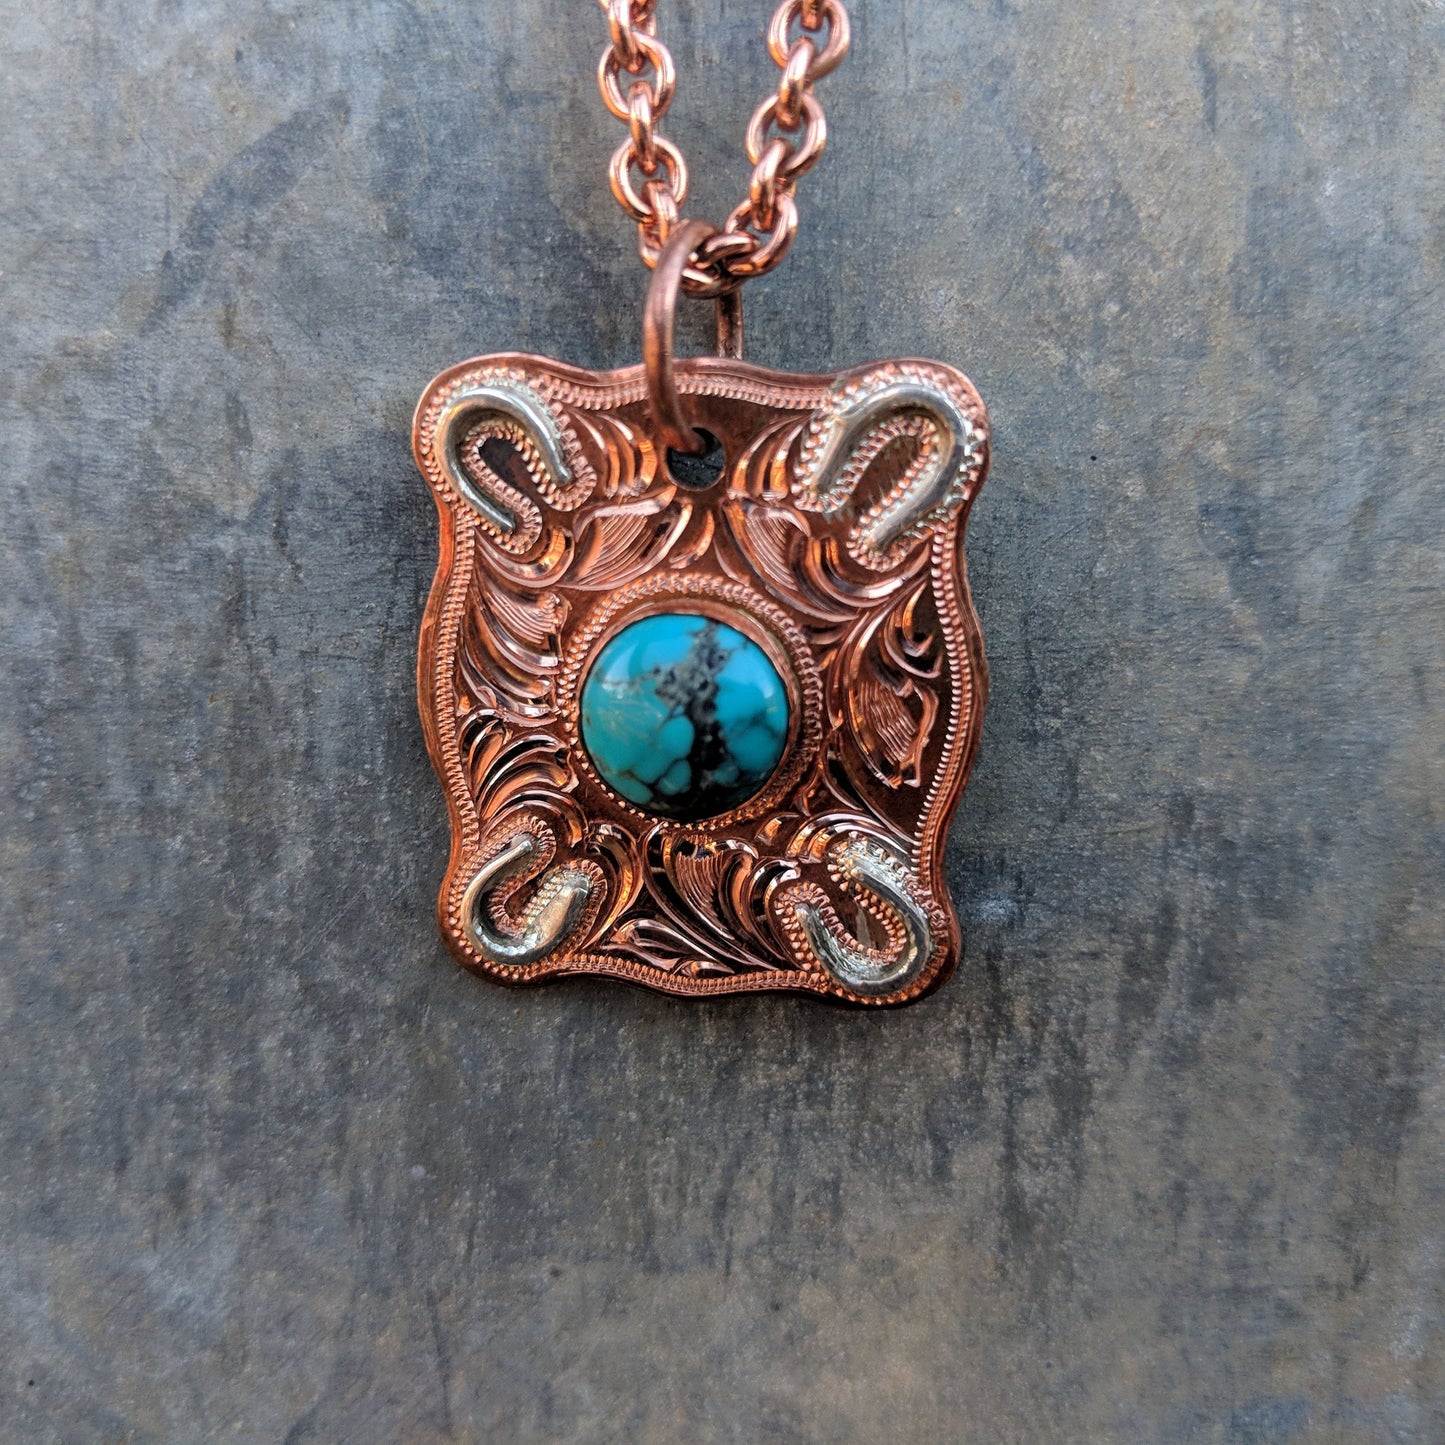 Copper Engraved Necklace, Turquoise with Horse Shoe Overlays, Western Pendant Design PND00009 by Loreena Rose